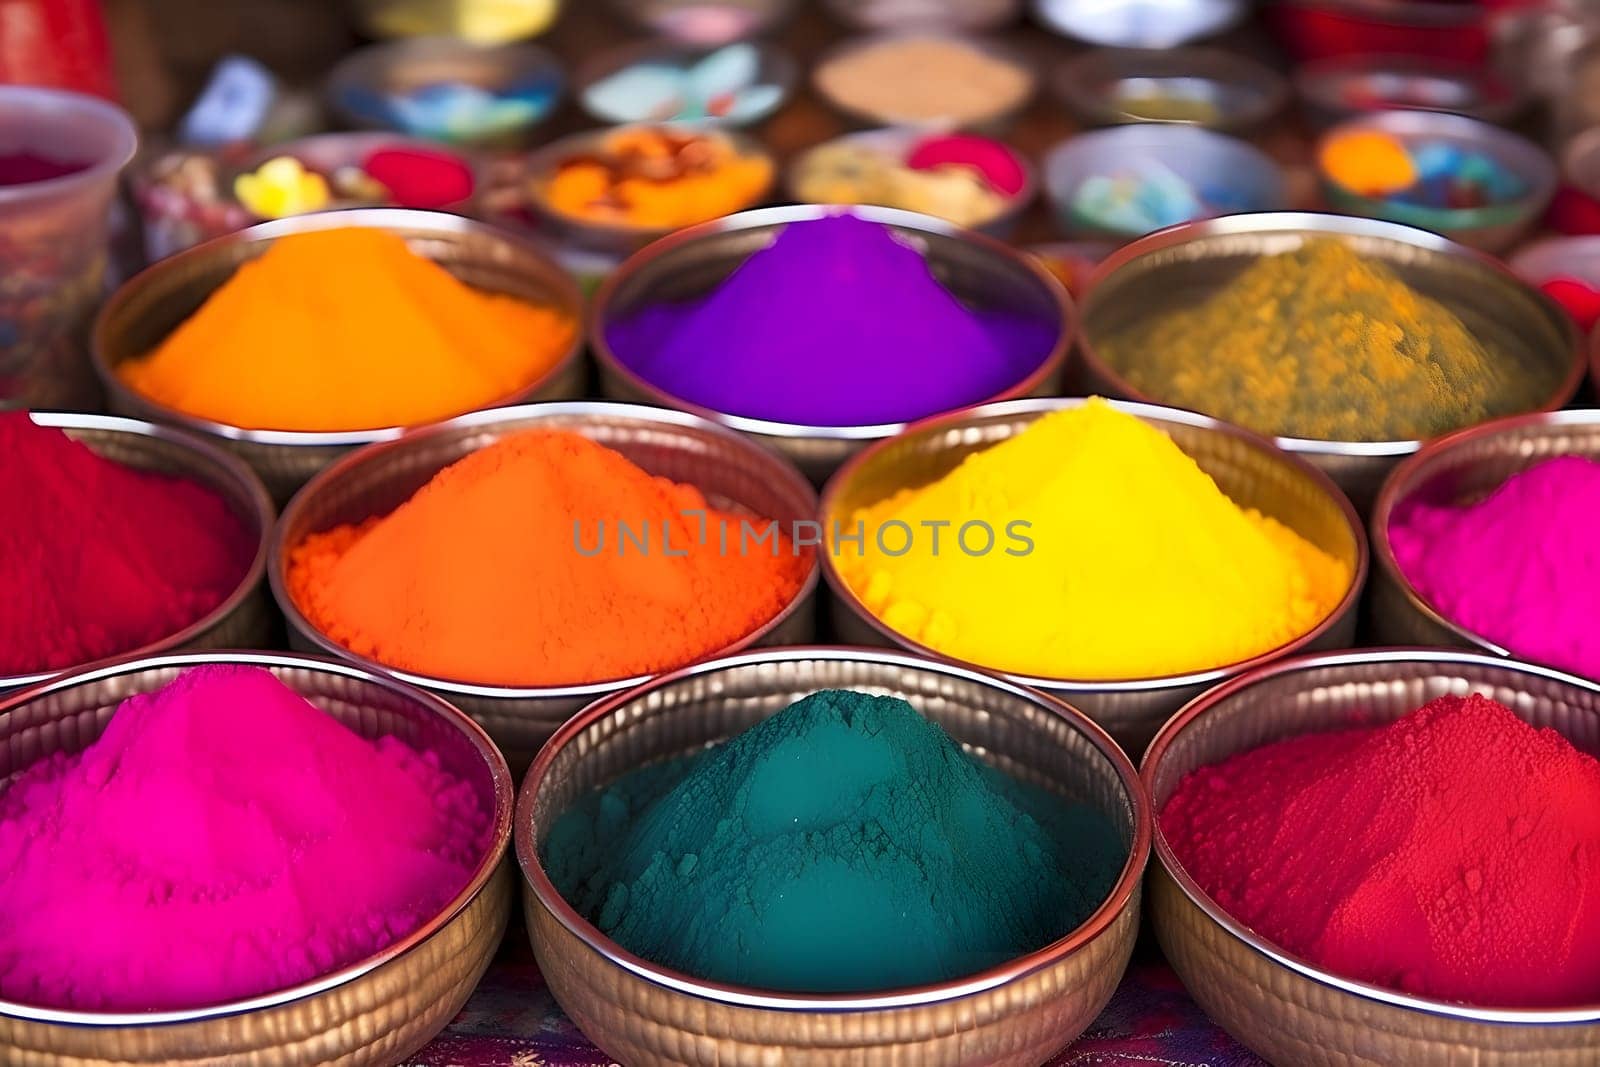 Colorful powder for sale in shop during Holi color festival, neural network generated photorealistic image by z1b